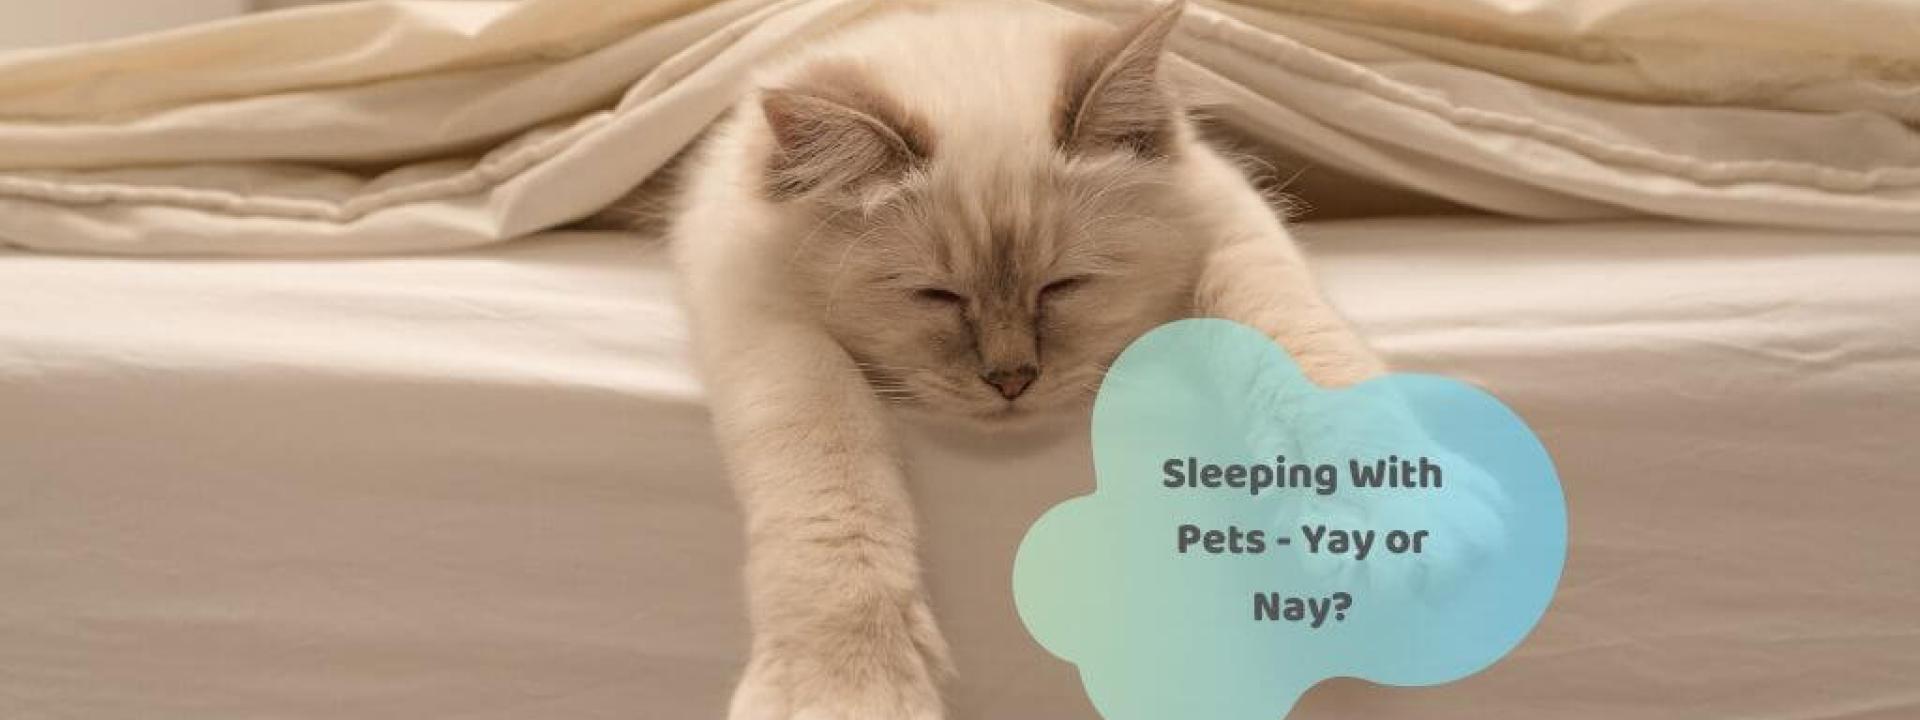 sleeping with pets can have adverse health issues